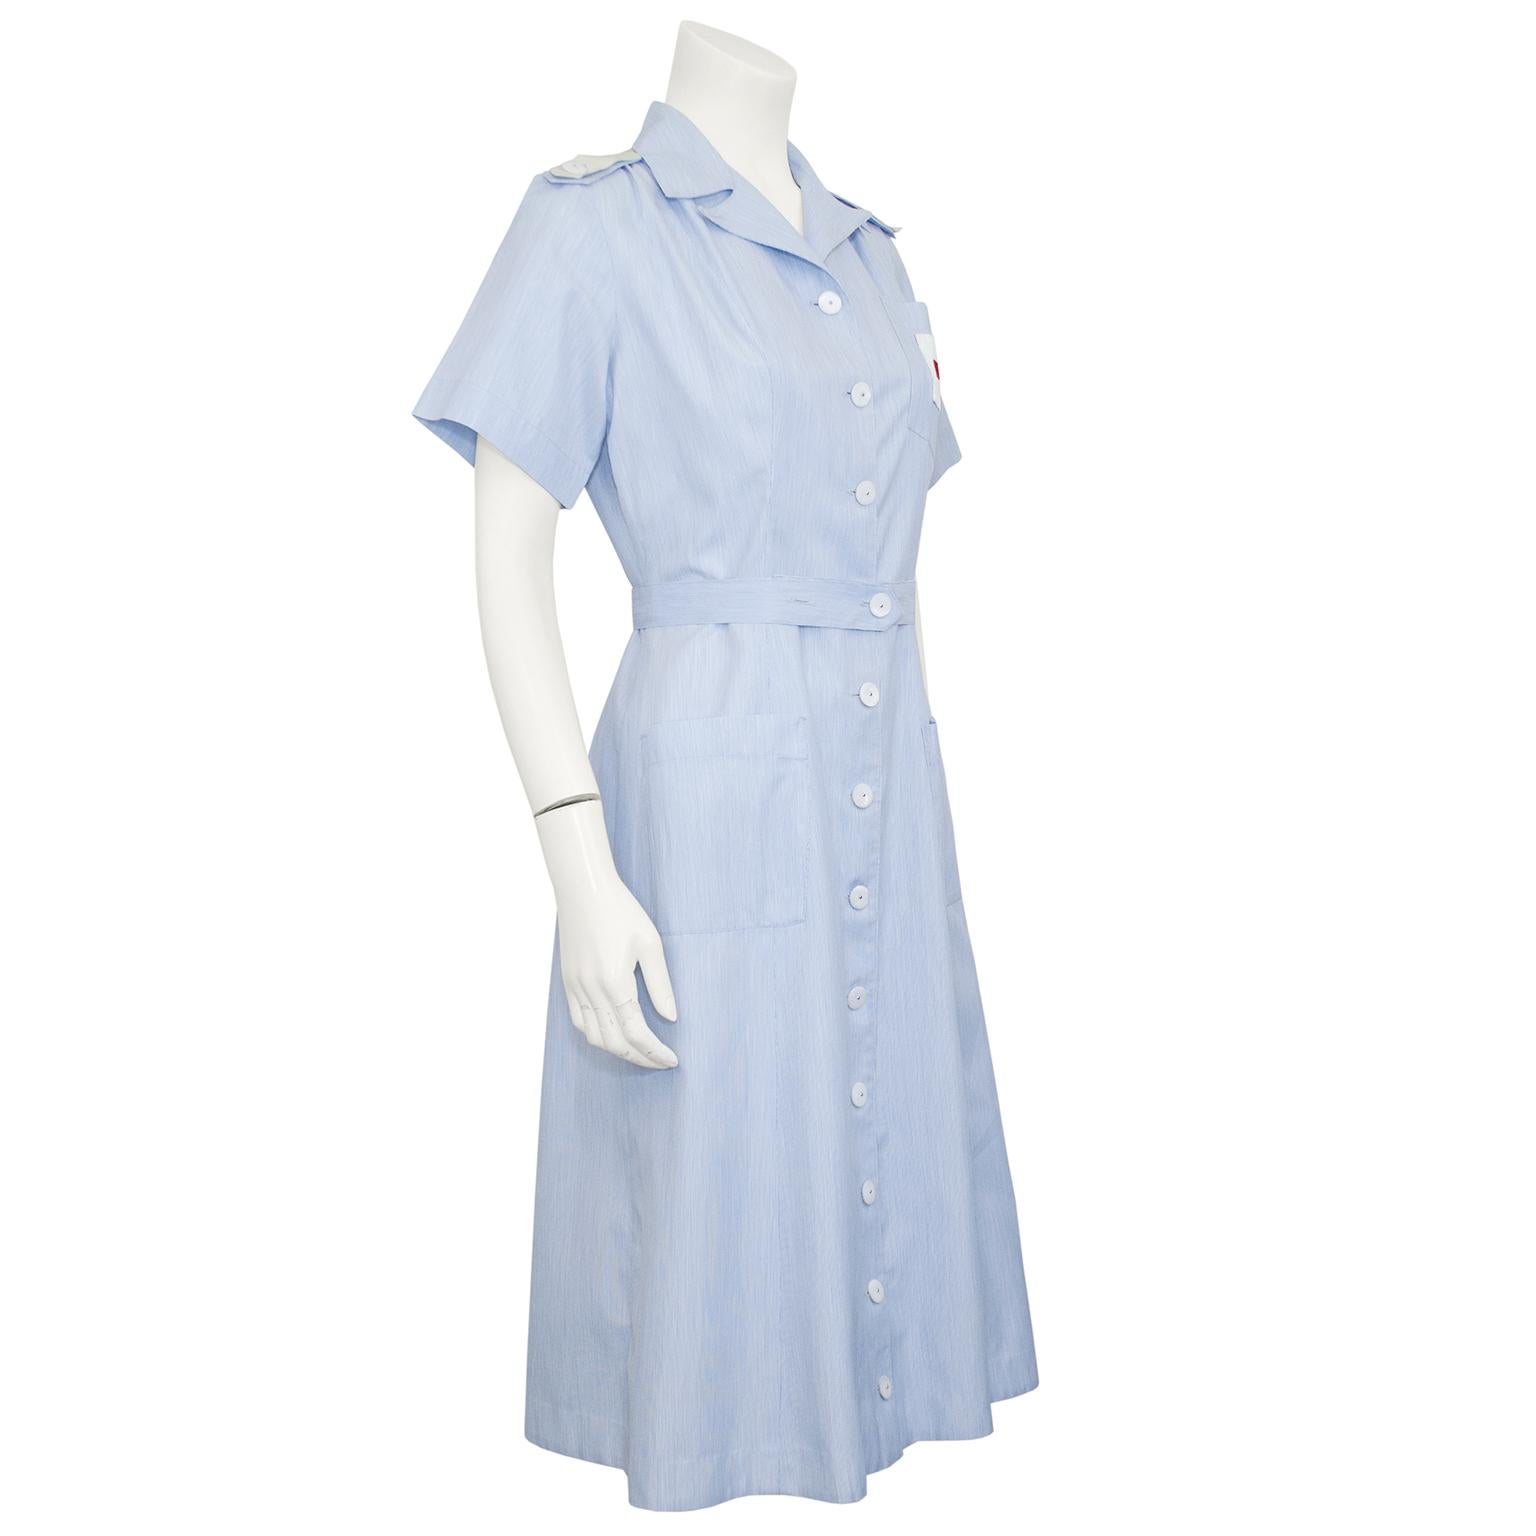 What a fun piece to add you collection of vintage. Authentic 1950's American Red Cross uniform that has all the style of the post WW2 era. Feminine and fitted with a hint of style. Subtle baby blue seersucker fabric with mother-of-pearl removable